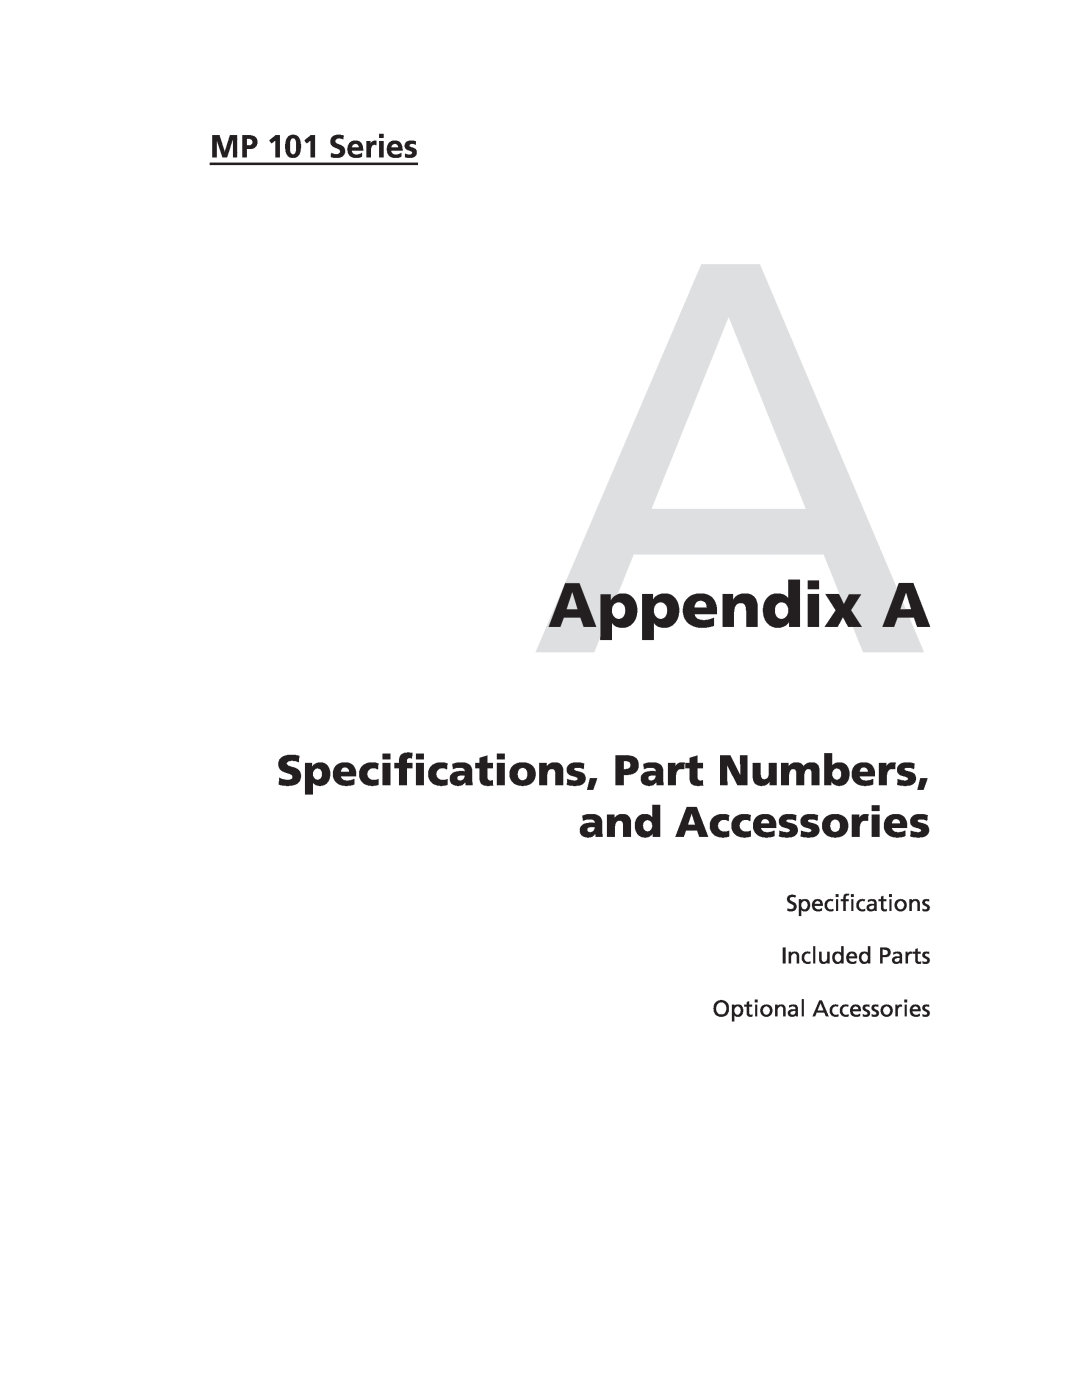 Extron electronic user manual AAppendix A, Speciﬁcations, Part Numbers, and Accessories, MP 101 Series 